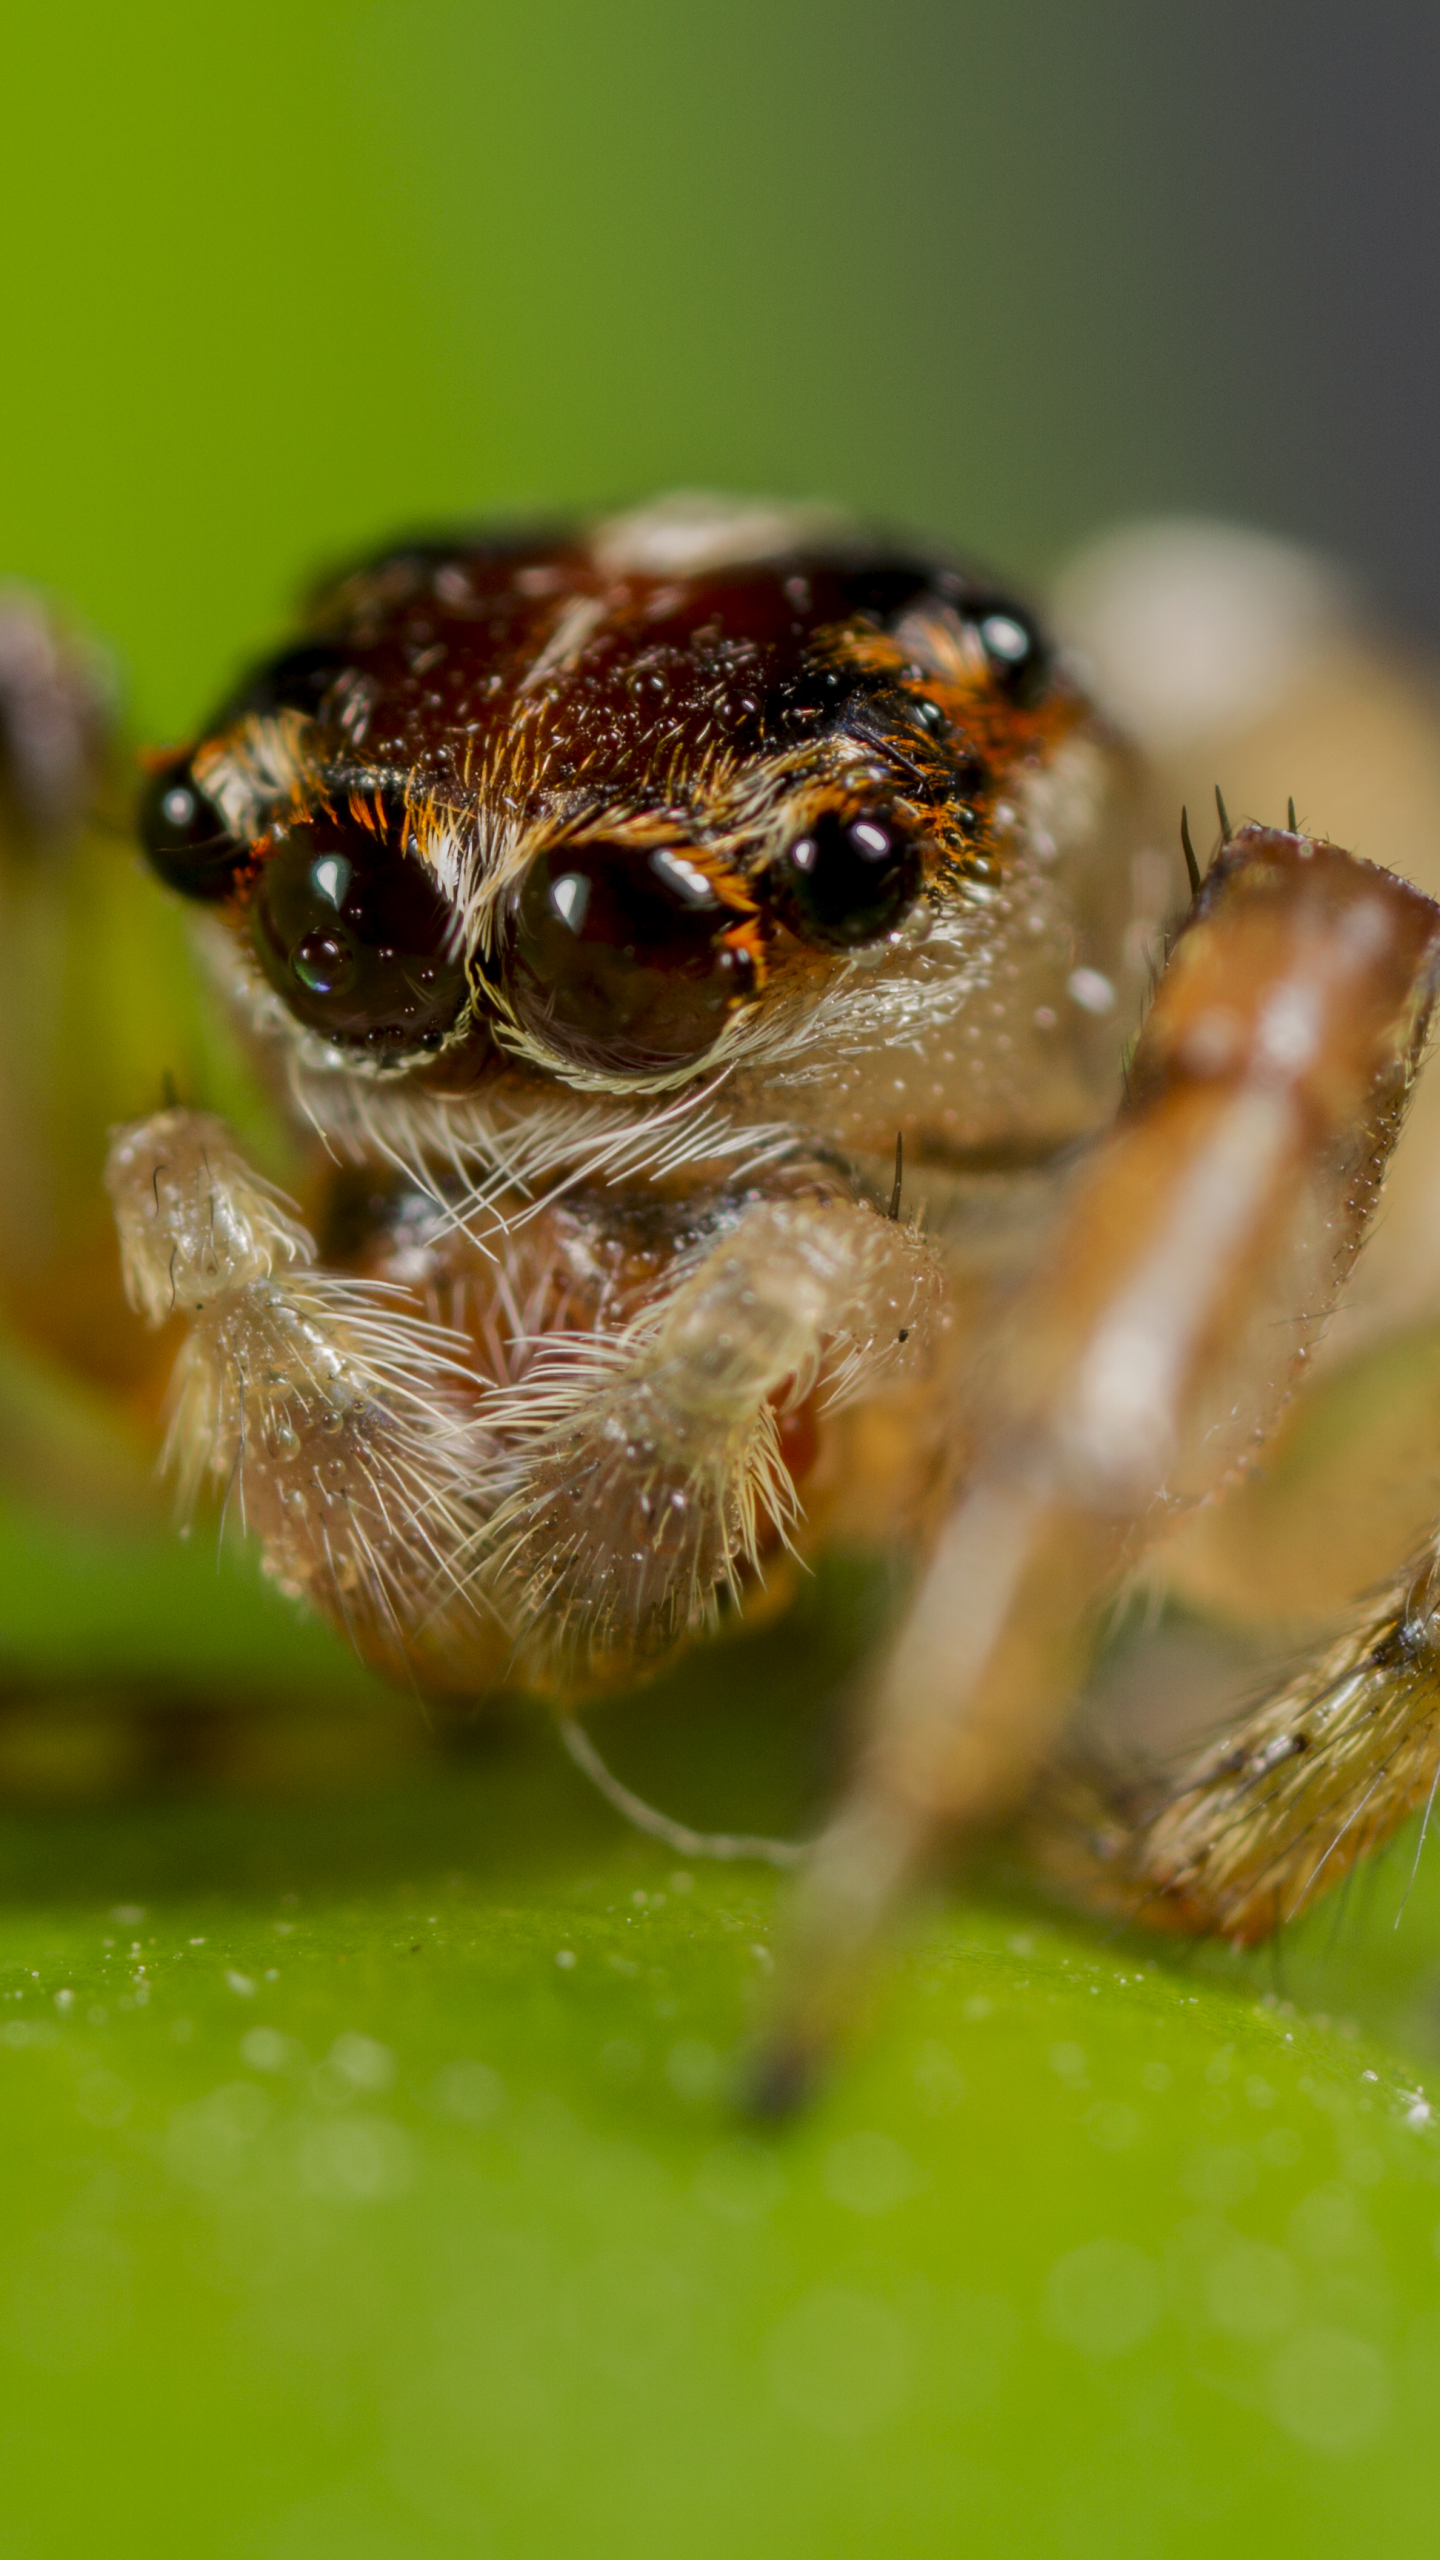 Free download Cute Jumping Spider Wallpaper Jumping spider by vexxa [5184x3456] for your Desktop, Mobile & Tablet. Explore Cute Spider Wallpaper. Cute Spider Wallpaper, Spider Wallpaper, HD Spider Wallpaper